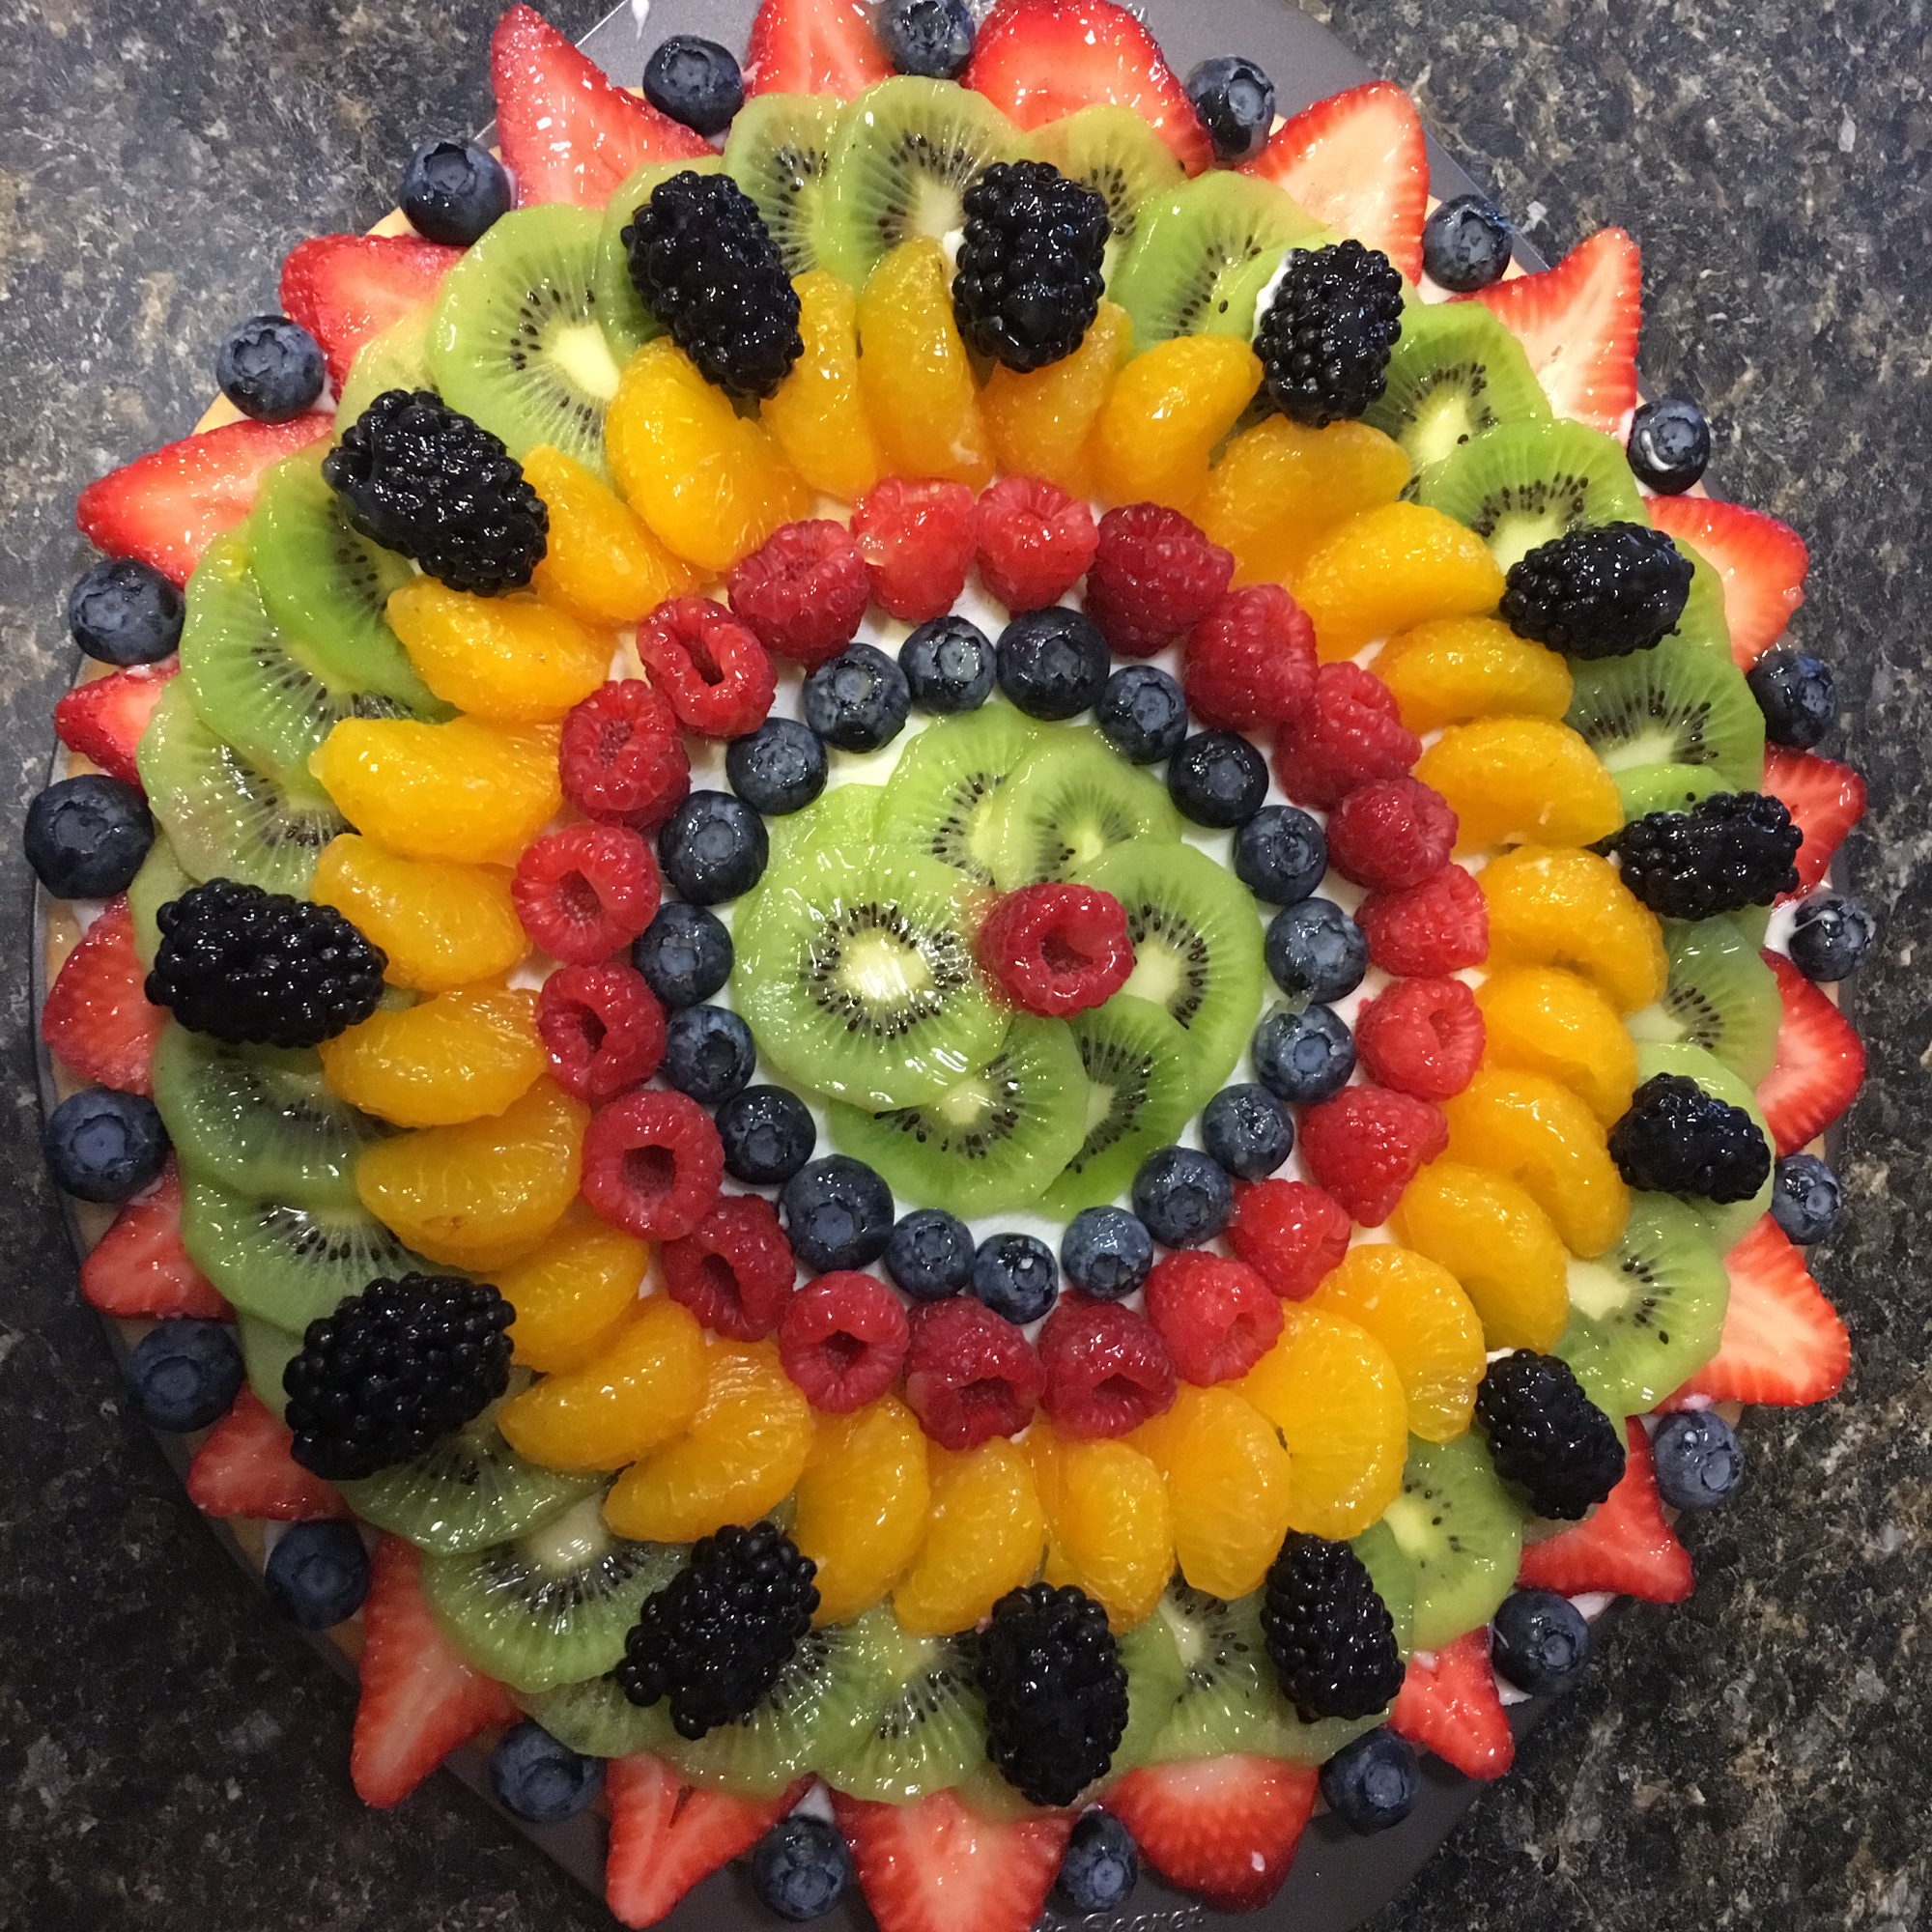 Fruit Pizza with White Chocolate